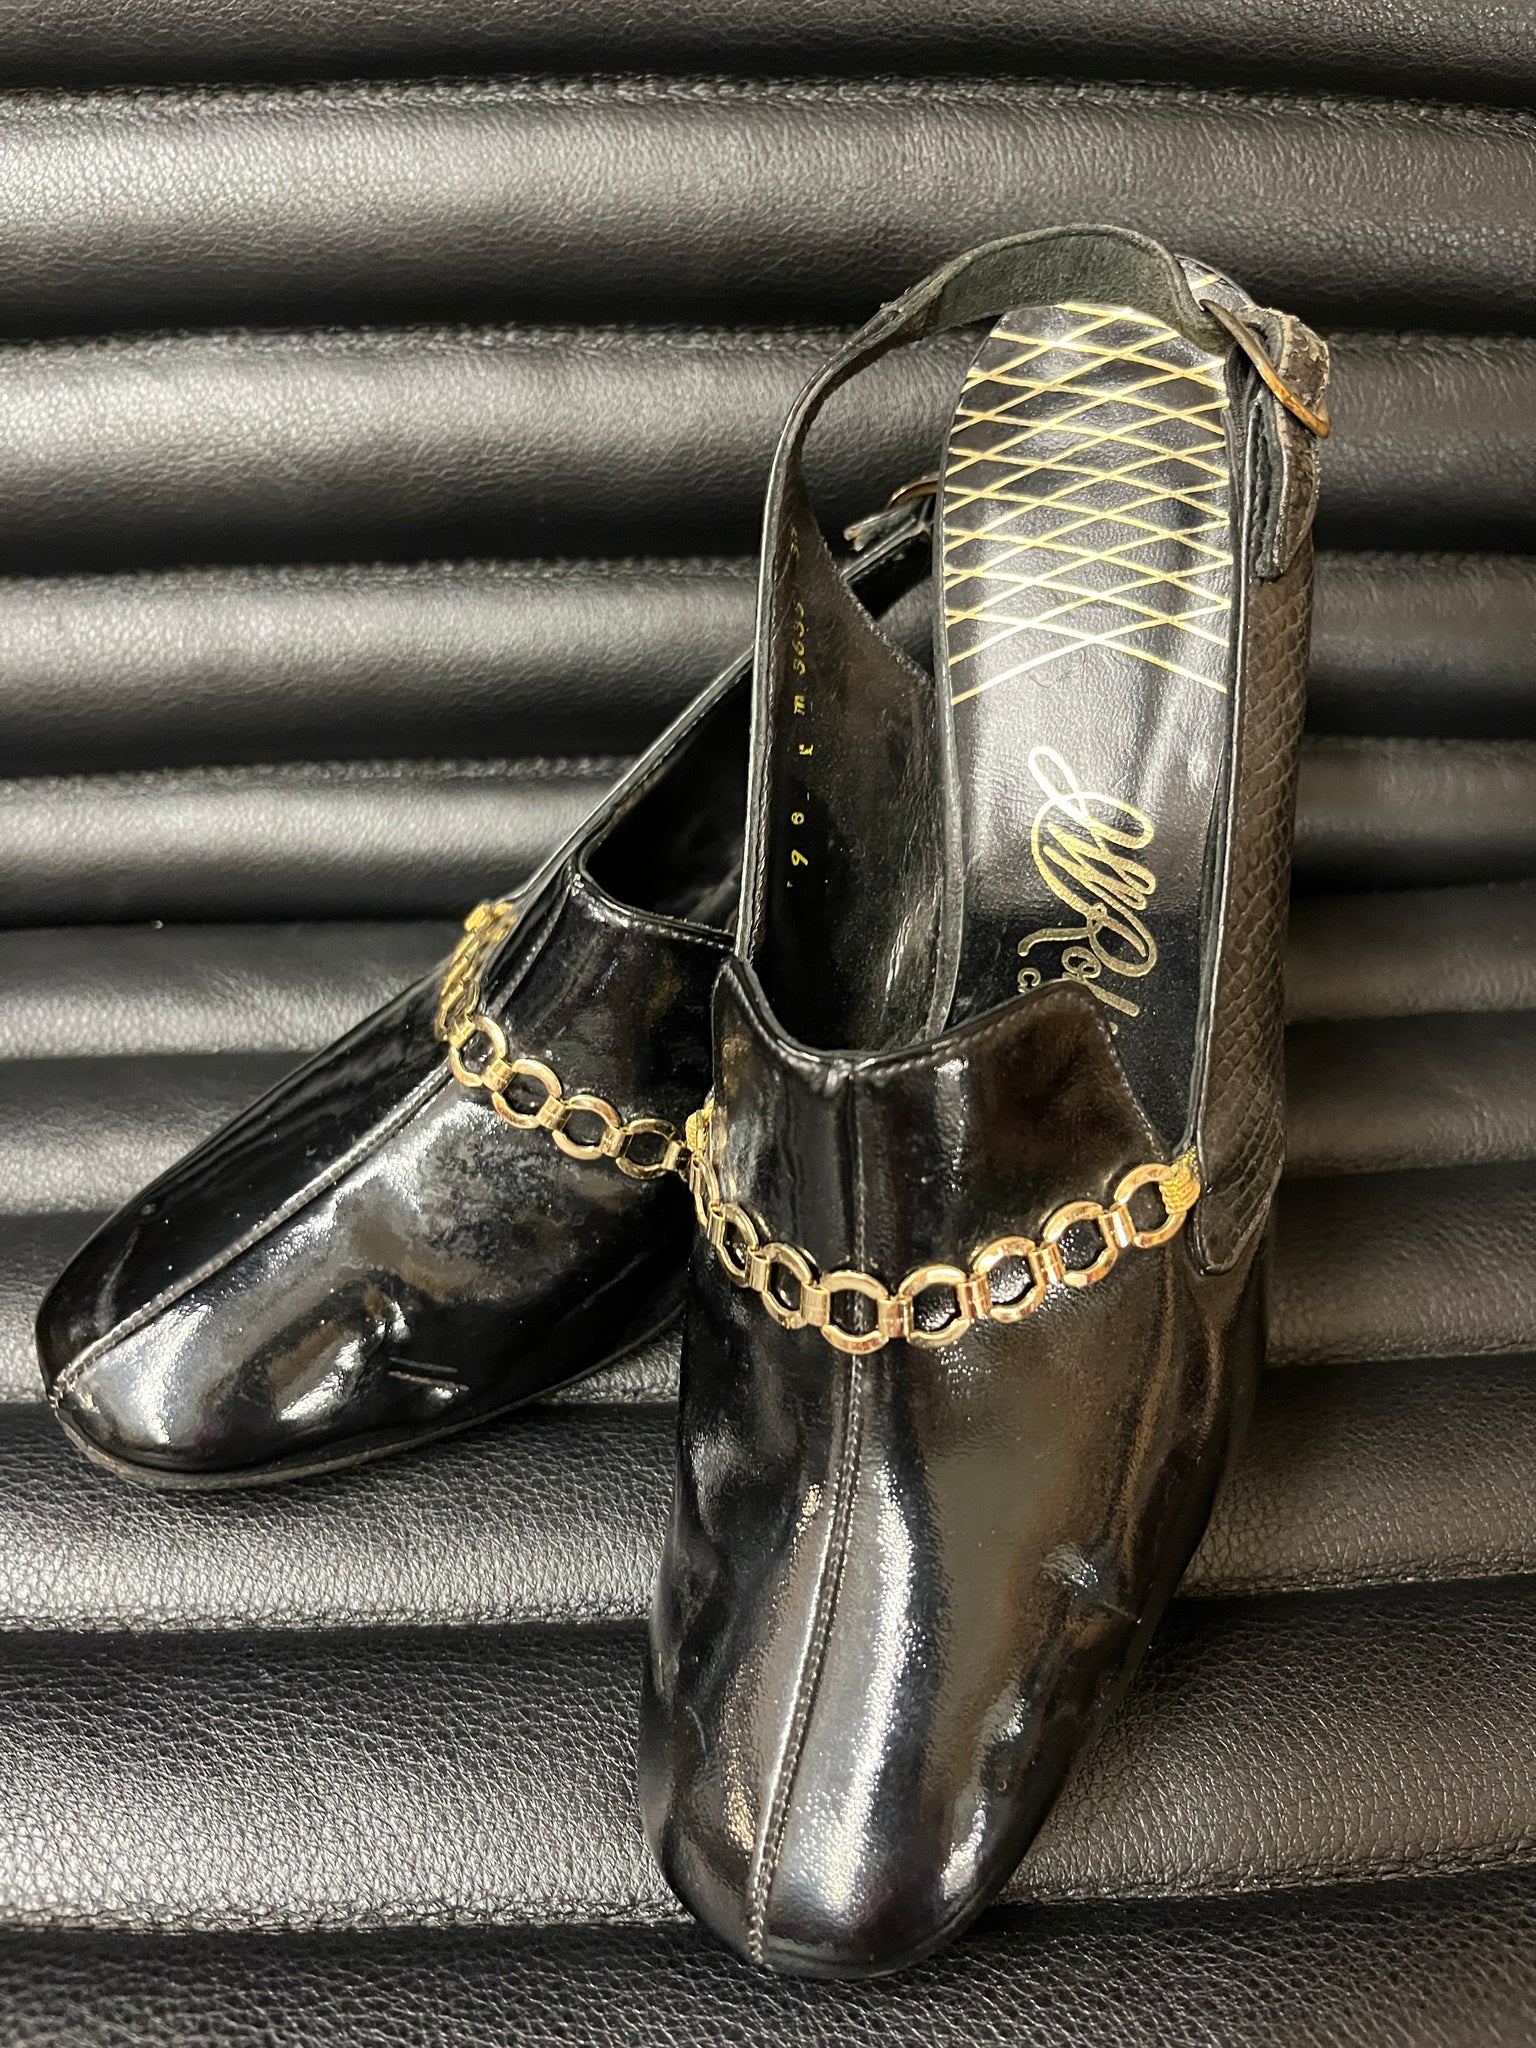 1960s SHOES - JW Robinson CA- block heel sling back with gold chain detail